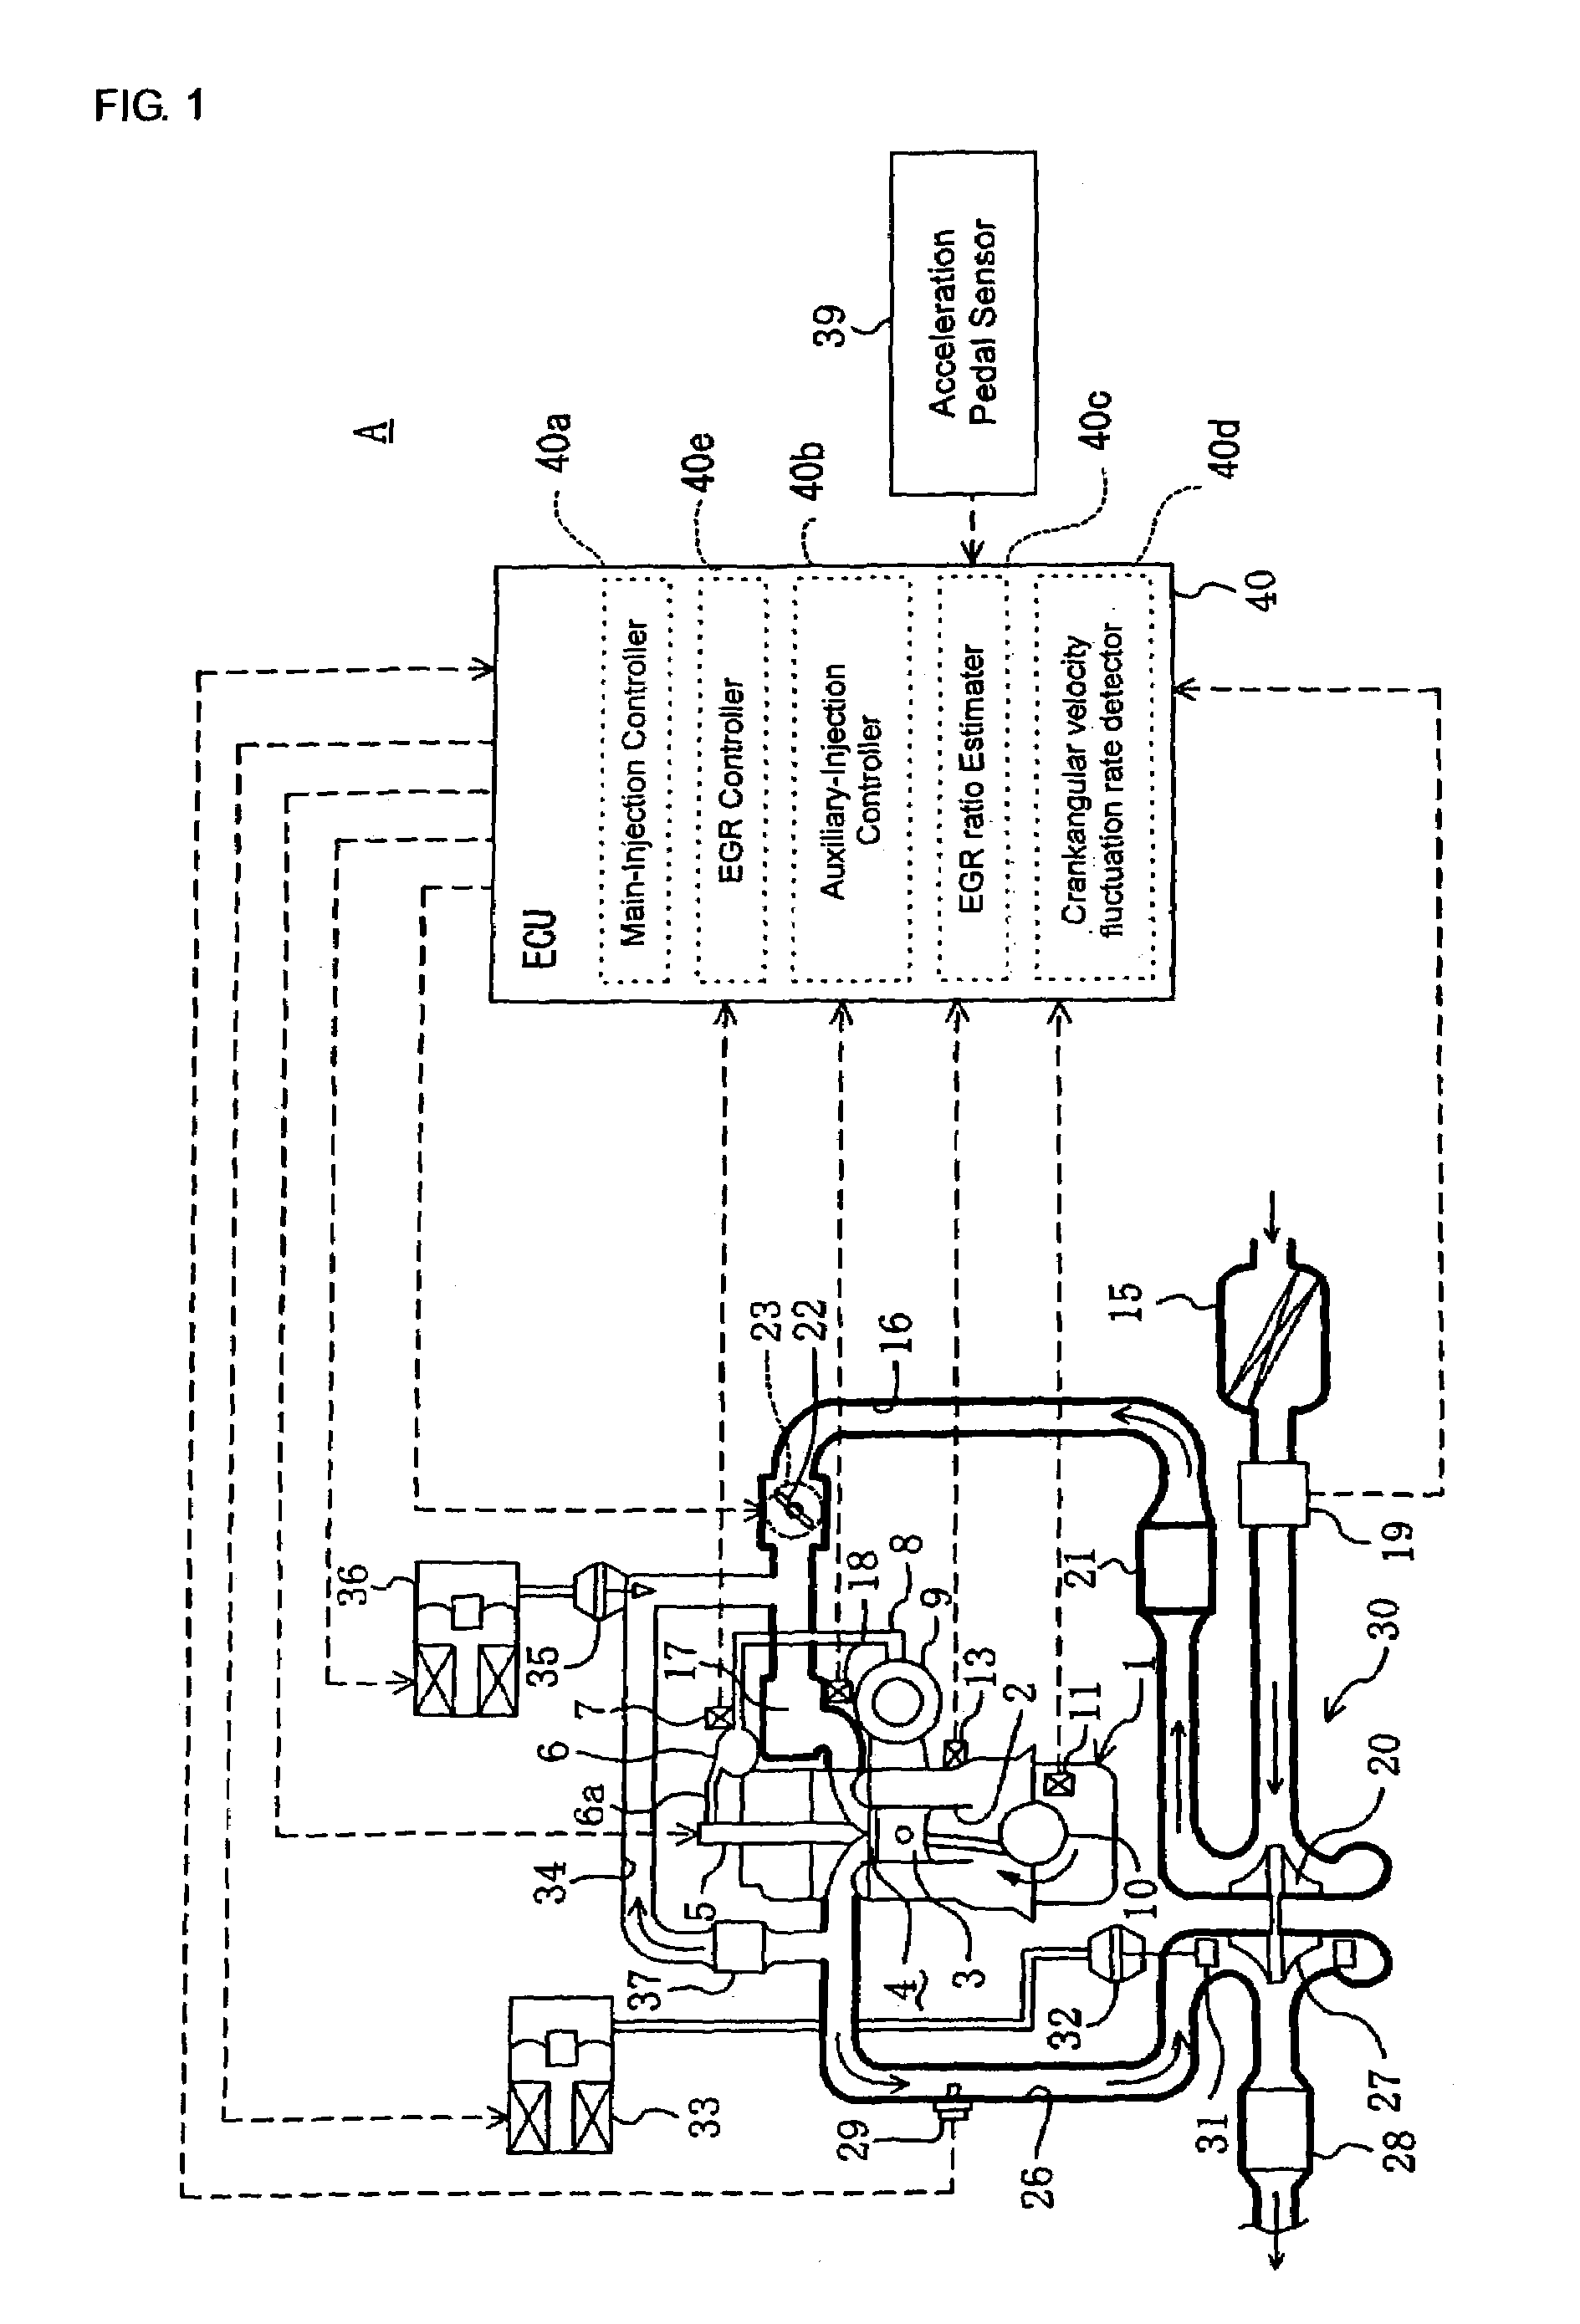 Combustion control apparatus for an engine